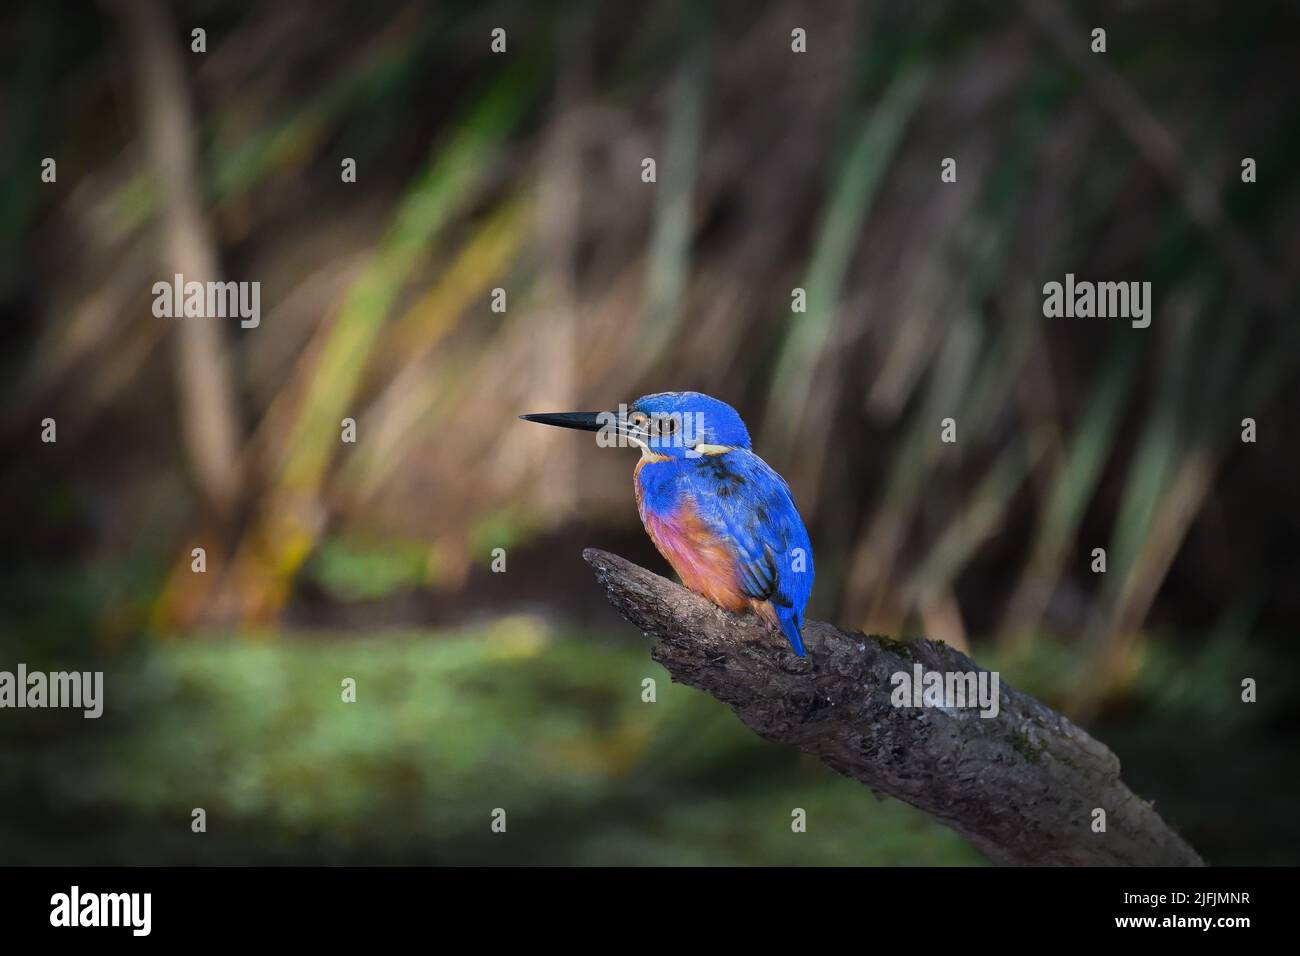 An Australian Azure Kingfisher -Alcedo azurea- bird perched on an old tree stump in soft early morning light looking for food Stock Photo